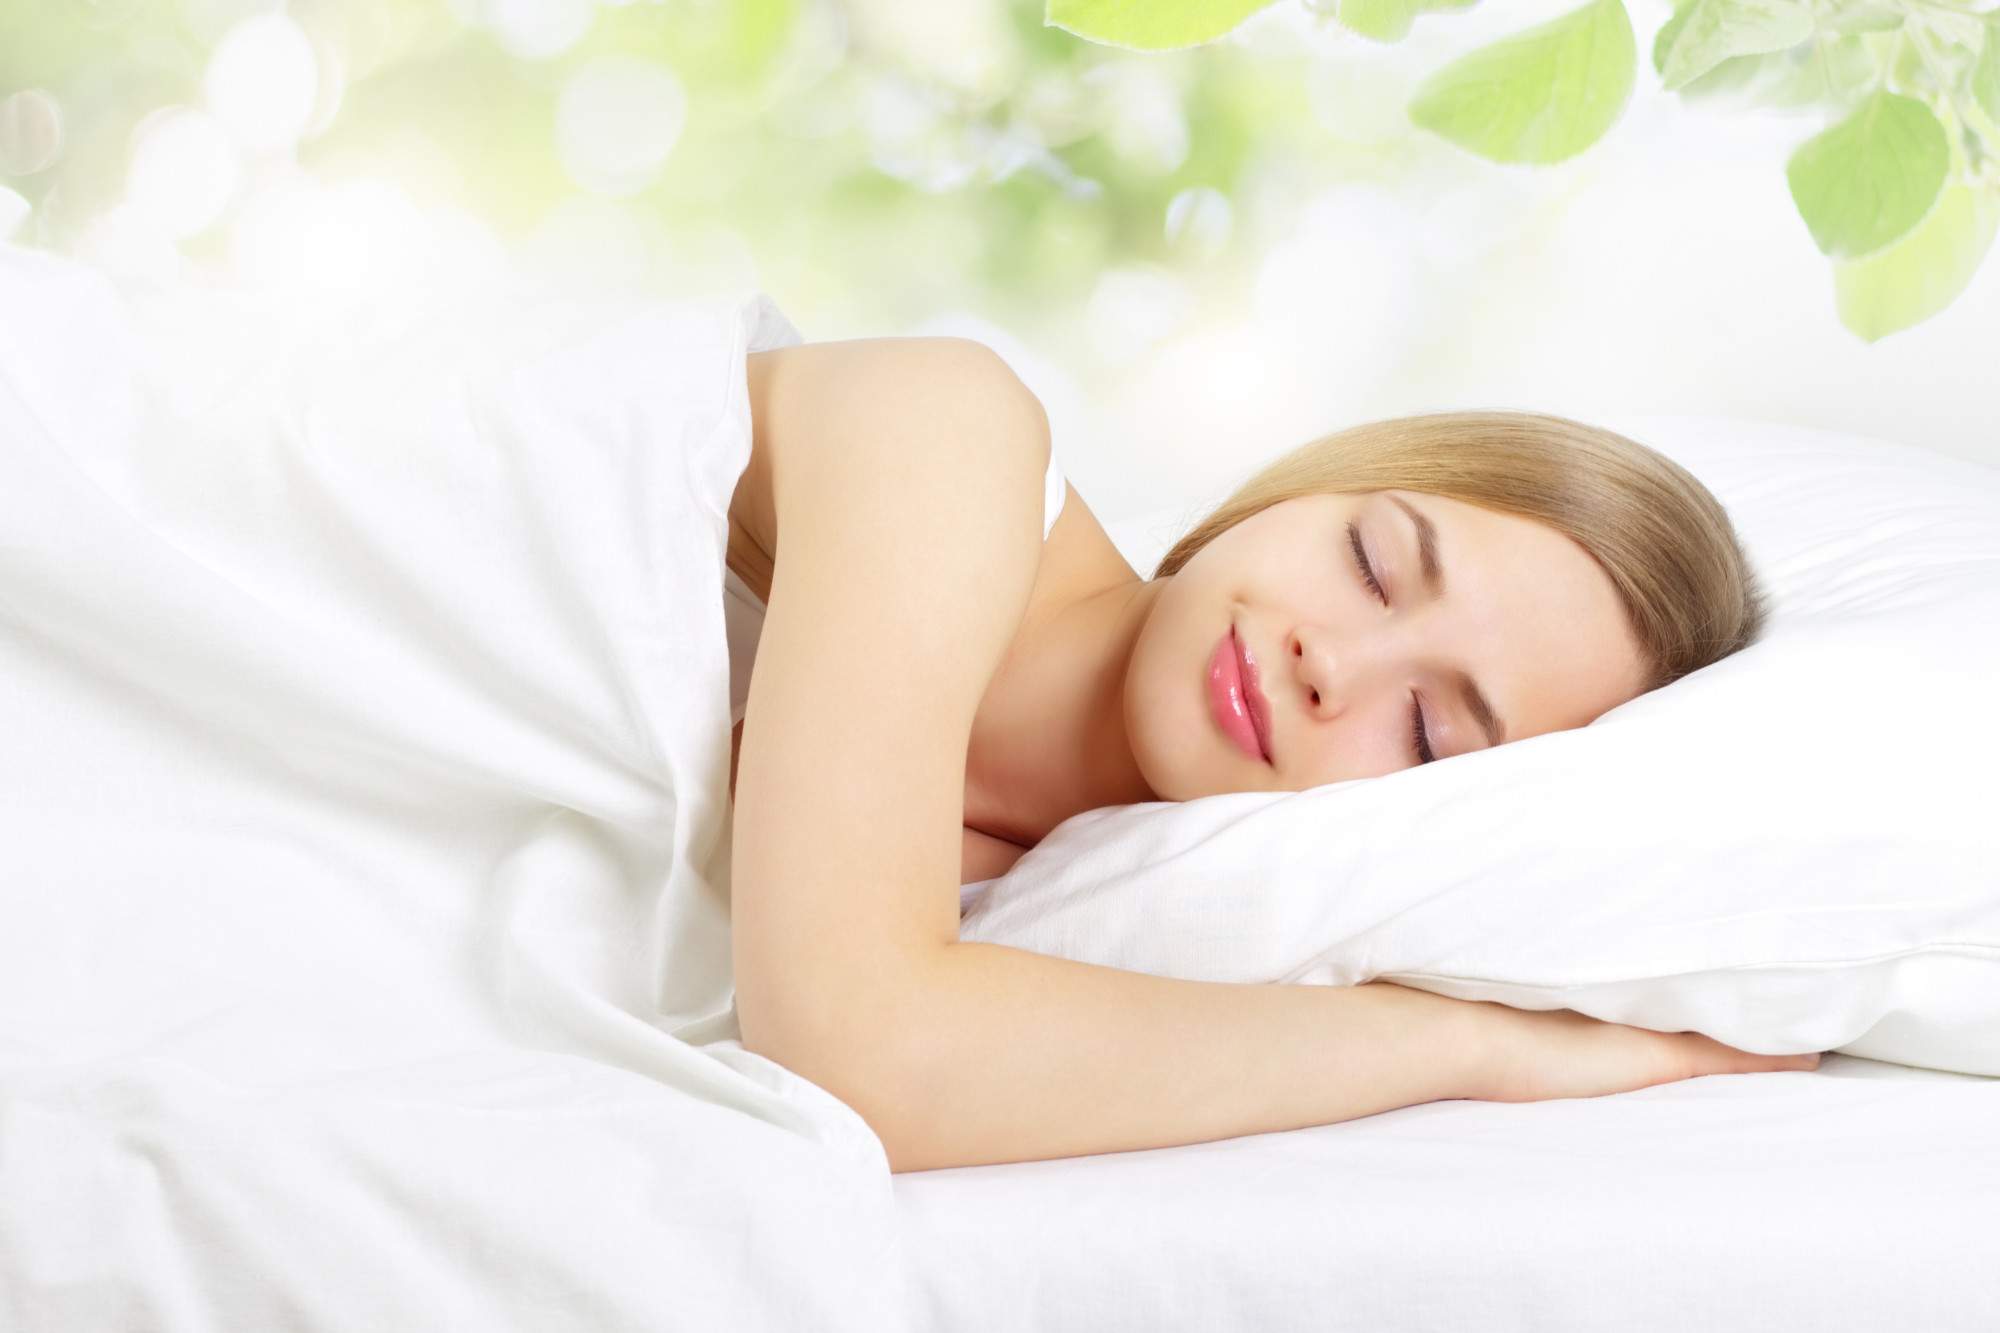 Getting Good Rest: How to Find the Right Sleep Position